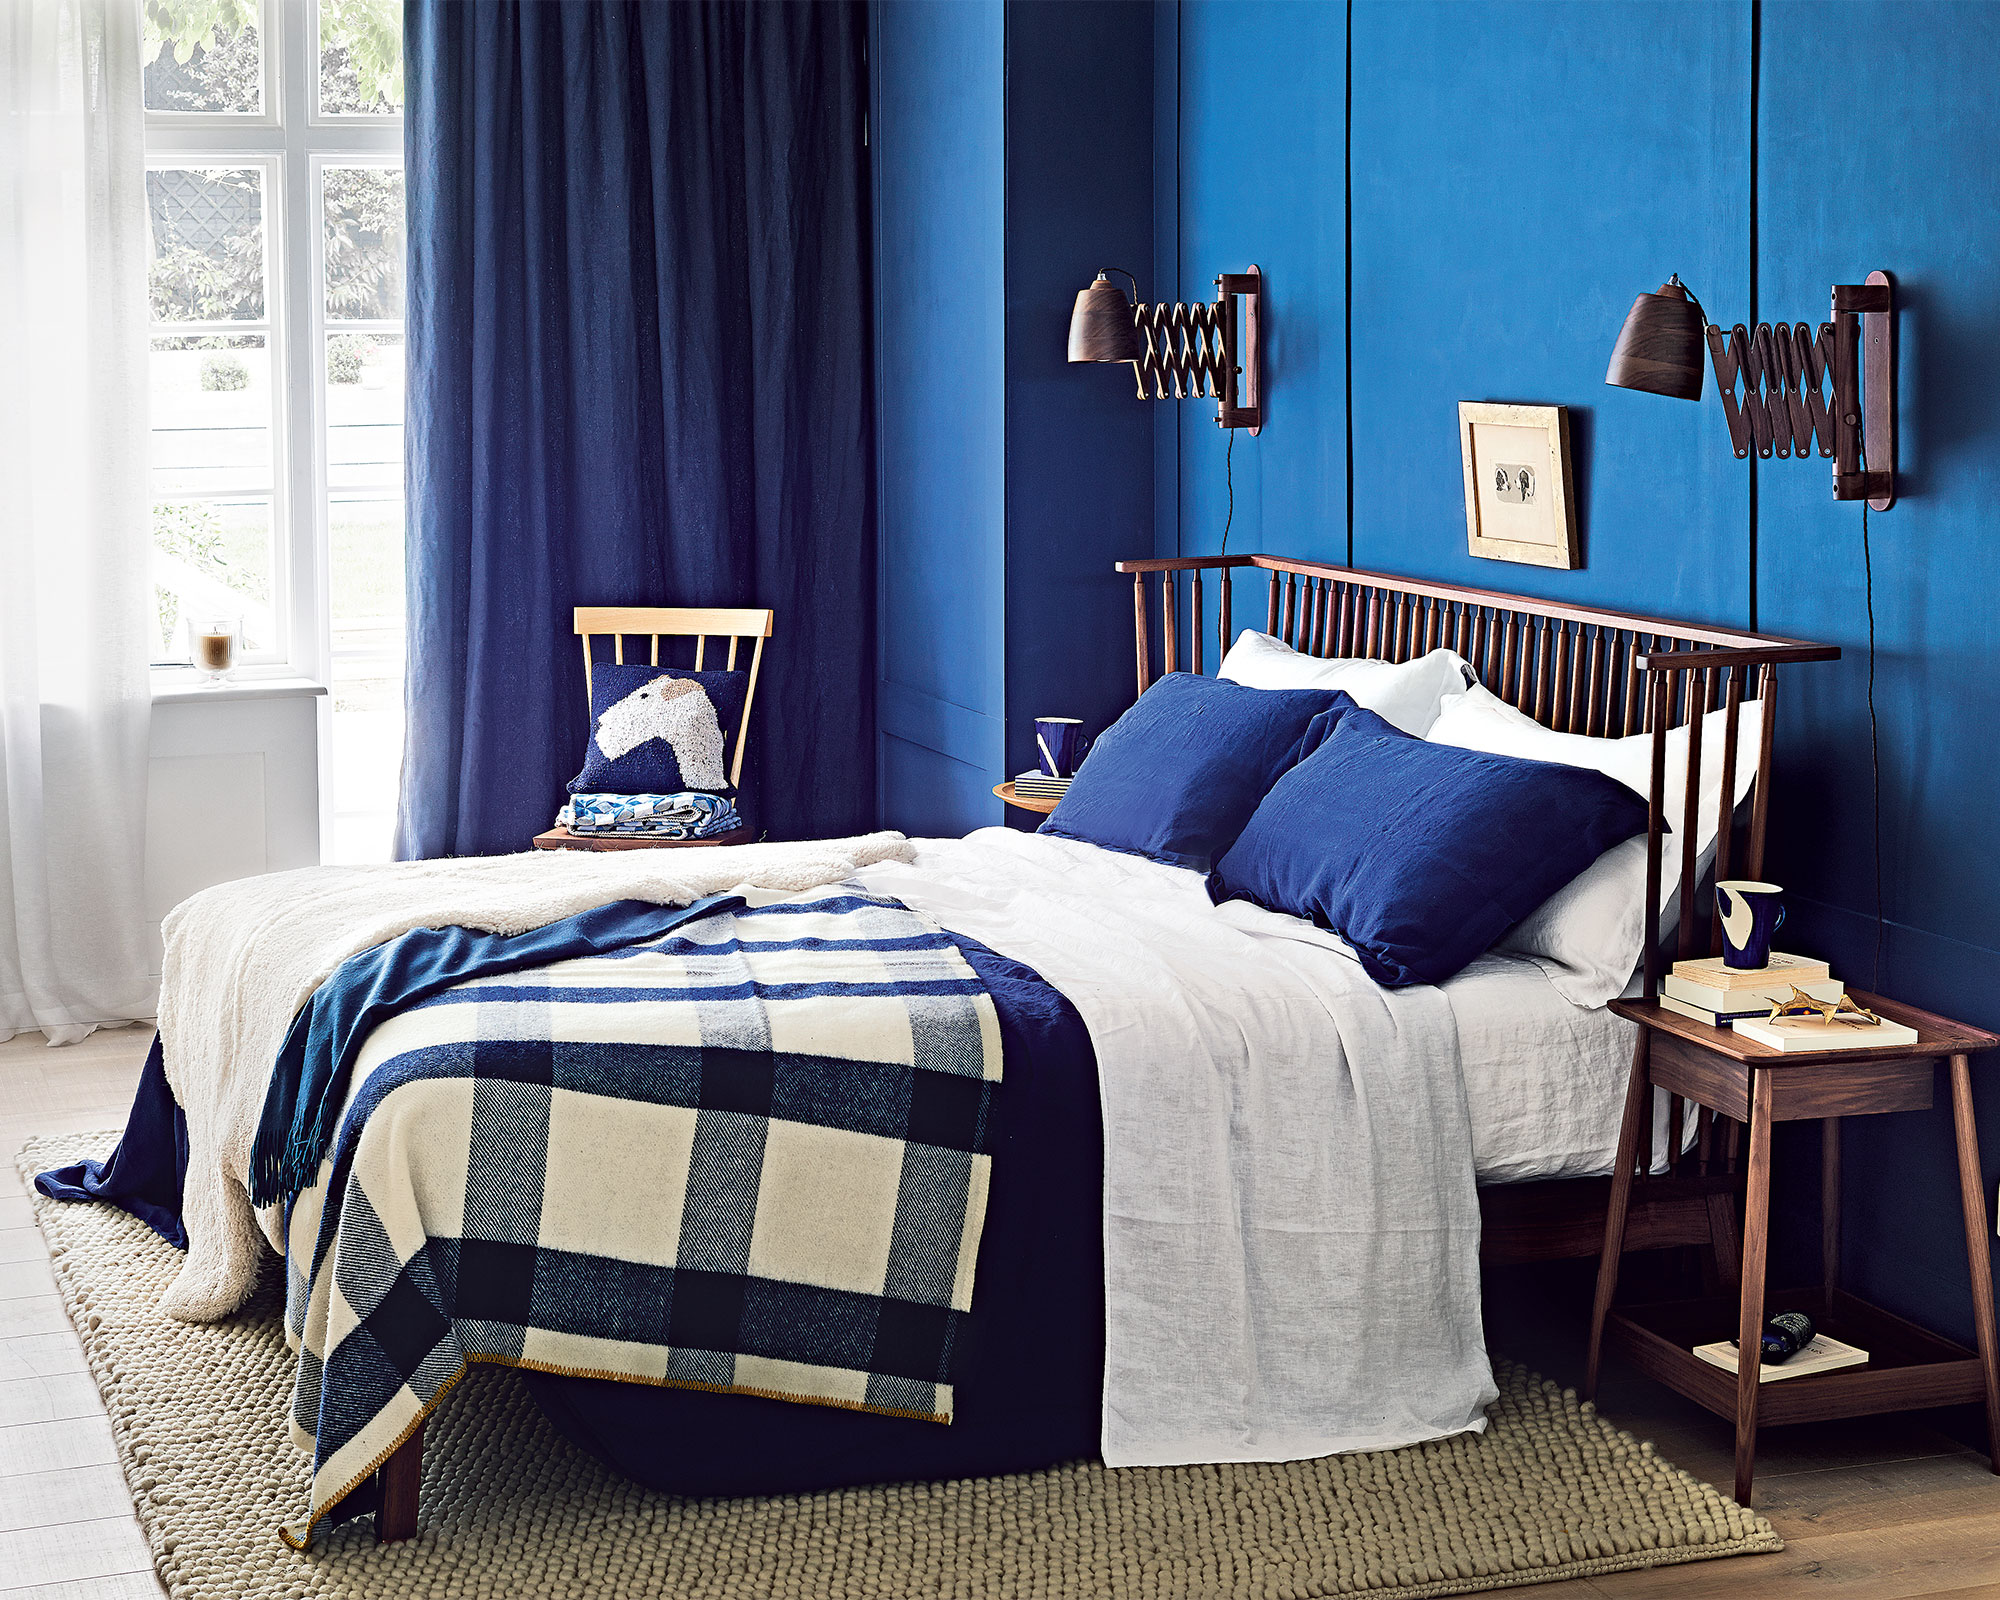 An example of bedroom wall lighting ideas in a dark blue scheme with large window and bed with check throw.